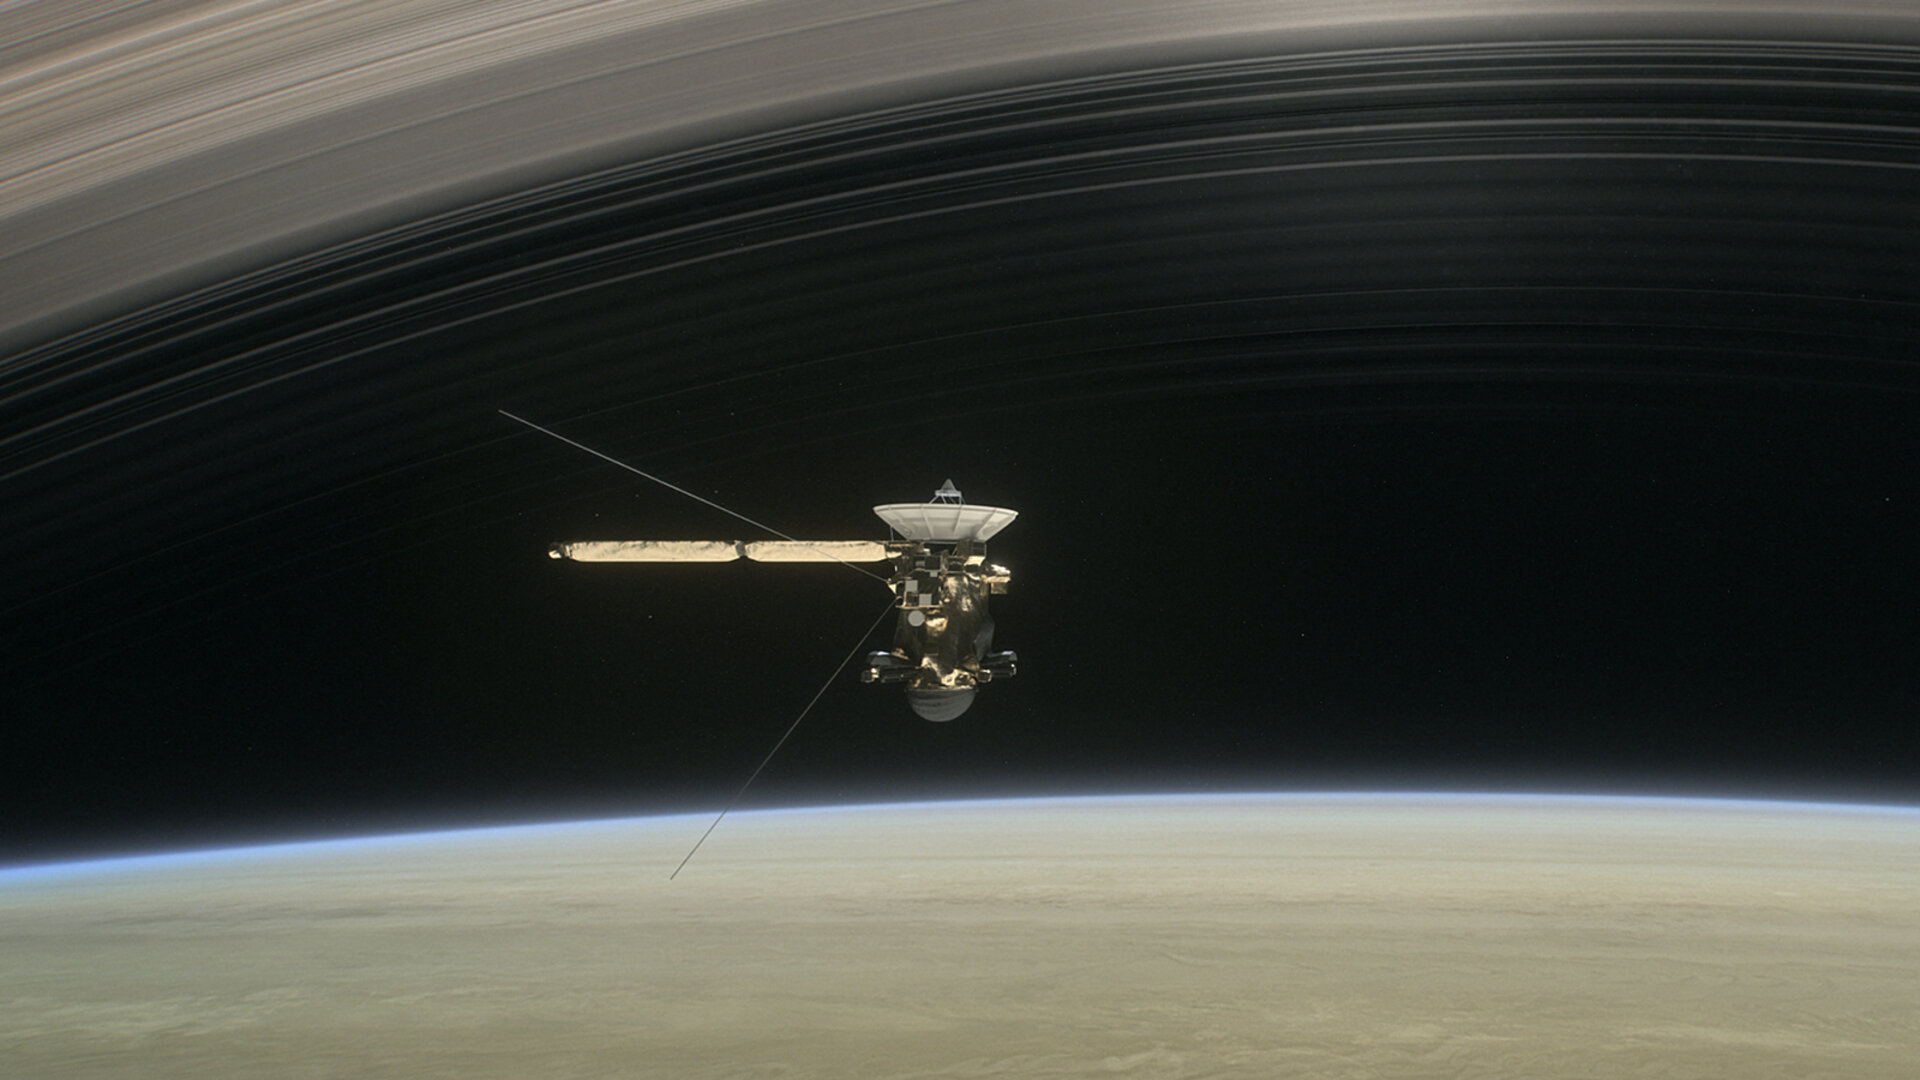 On 15 September 2017, Cassini will plunge into the atmosphere of Saturn